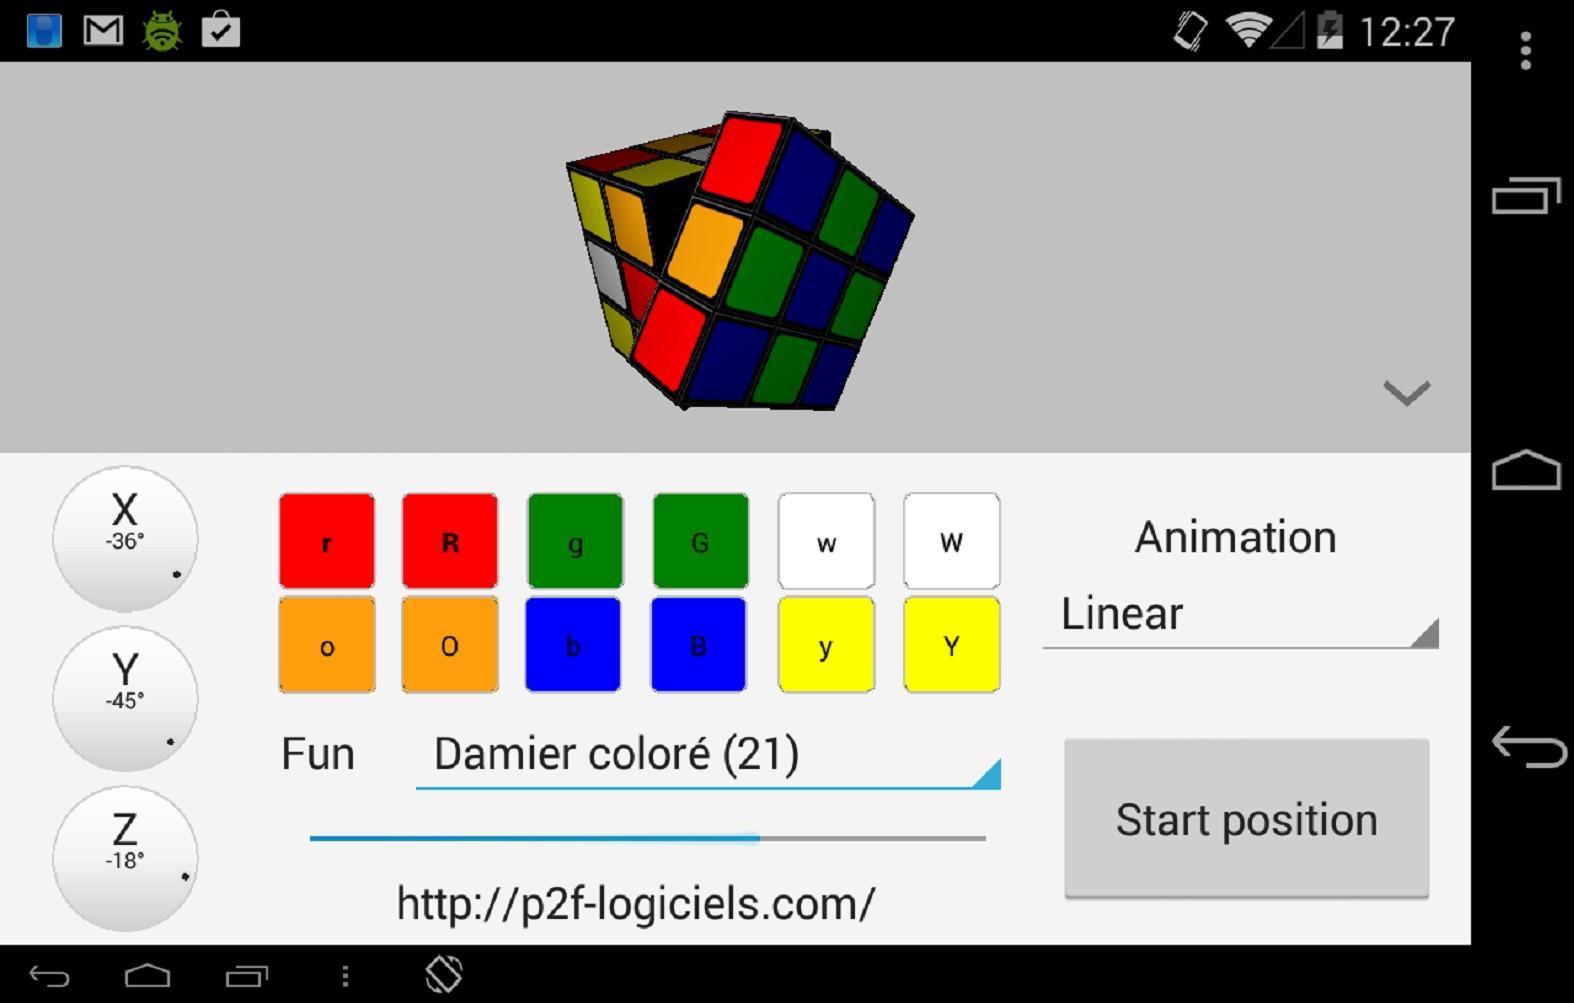 Fmx Rubik's Cube for Android - APK Download